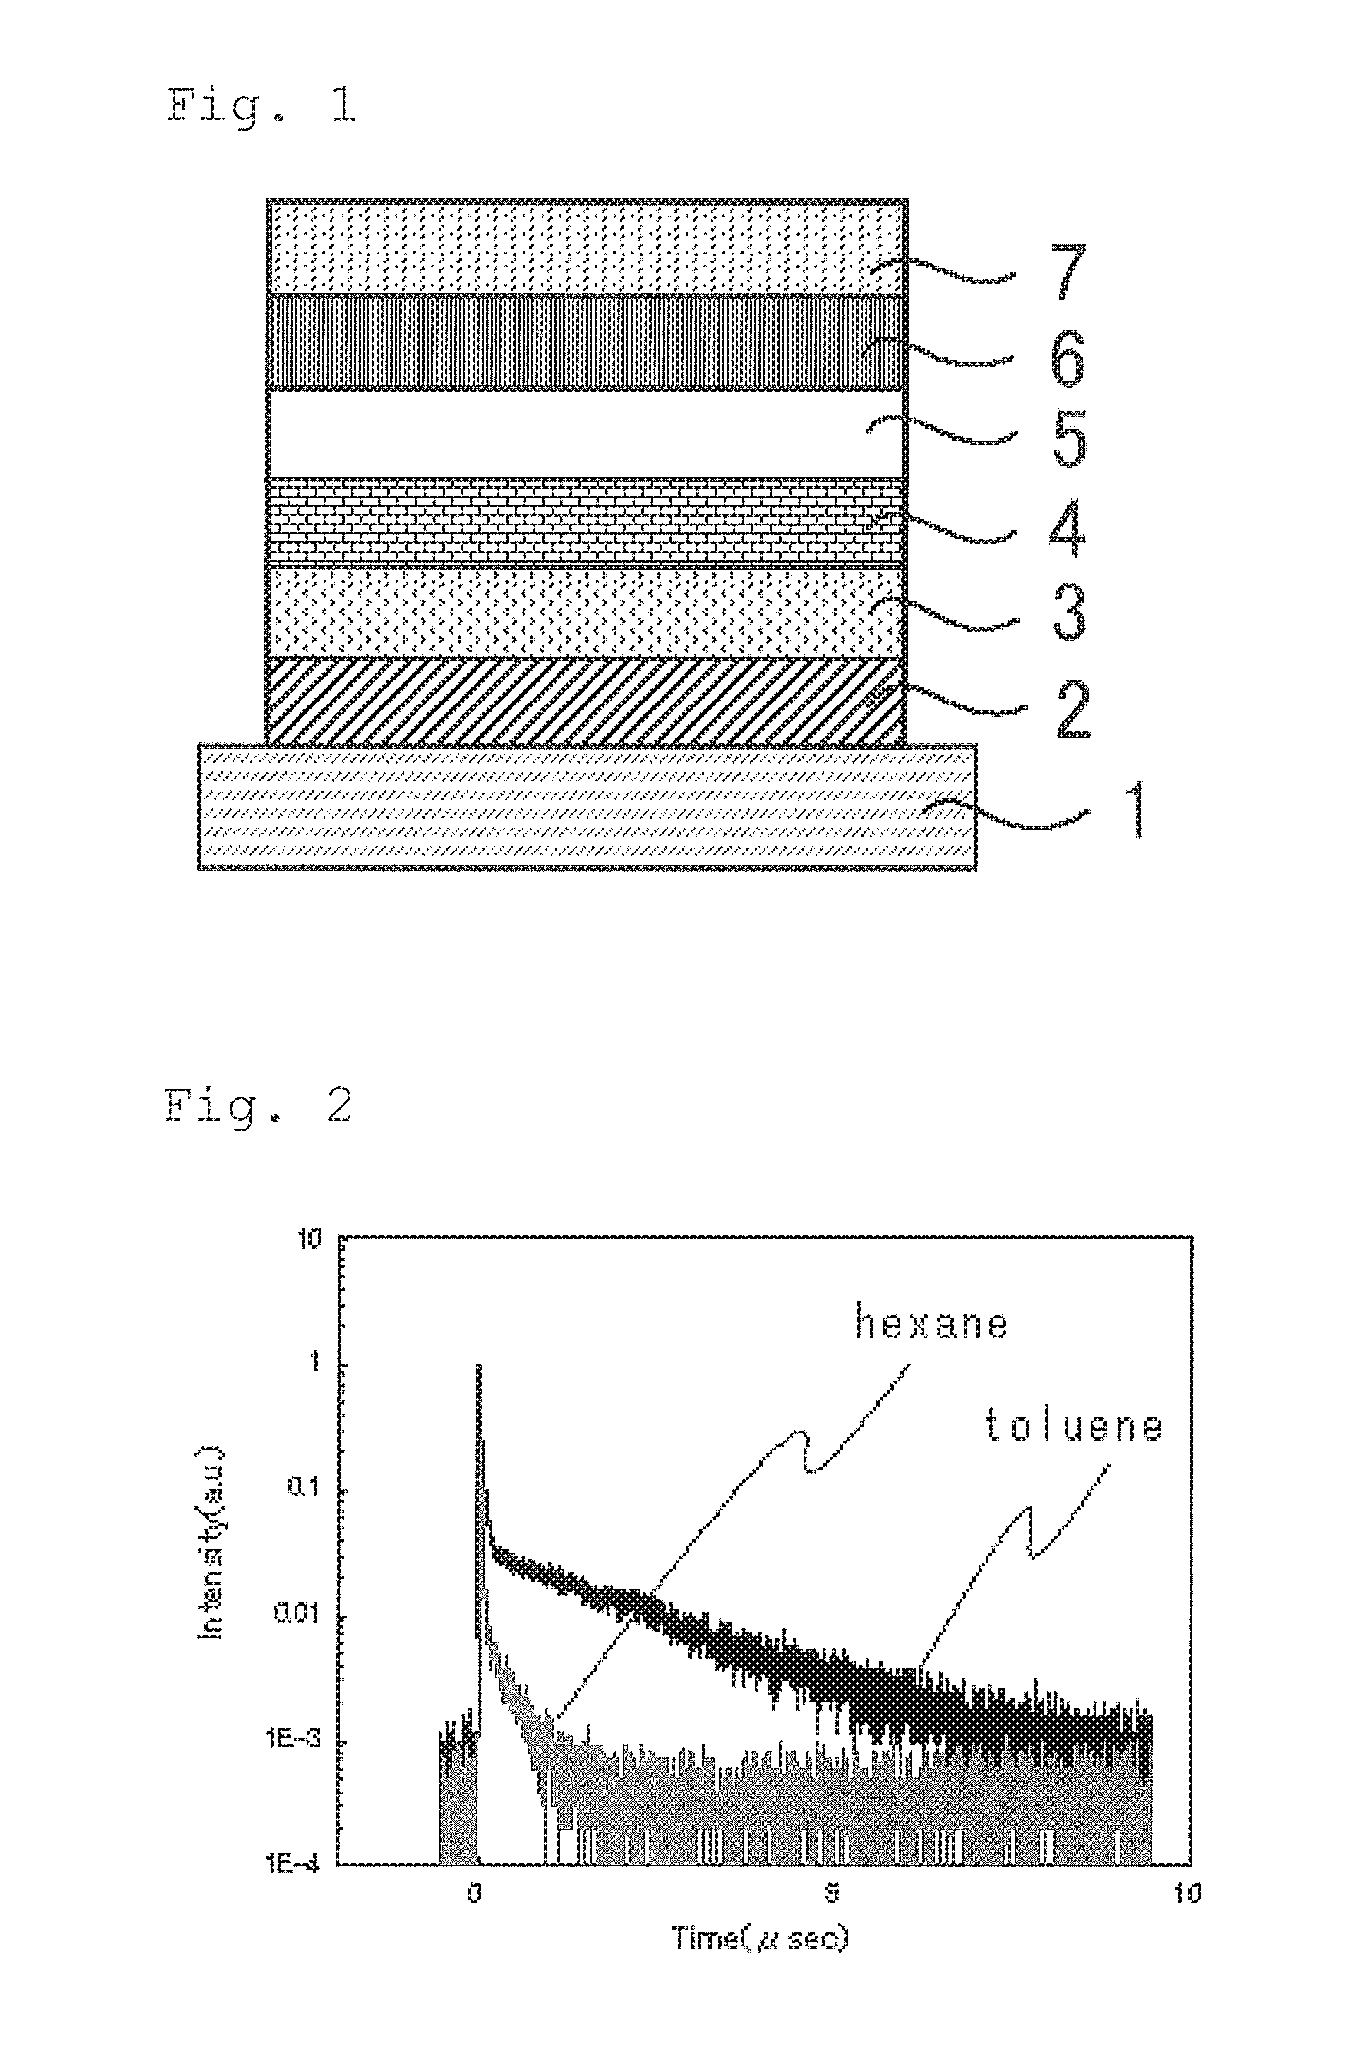 Light emitting material, delayed fluorescent emitter, organic light emitting device, and compound